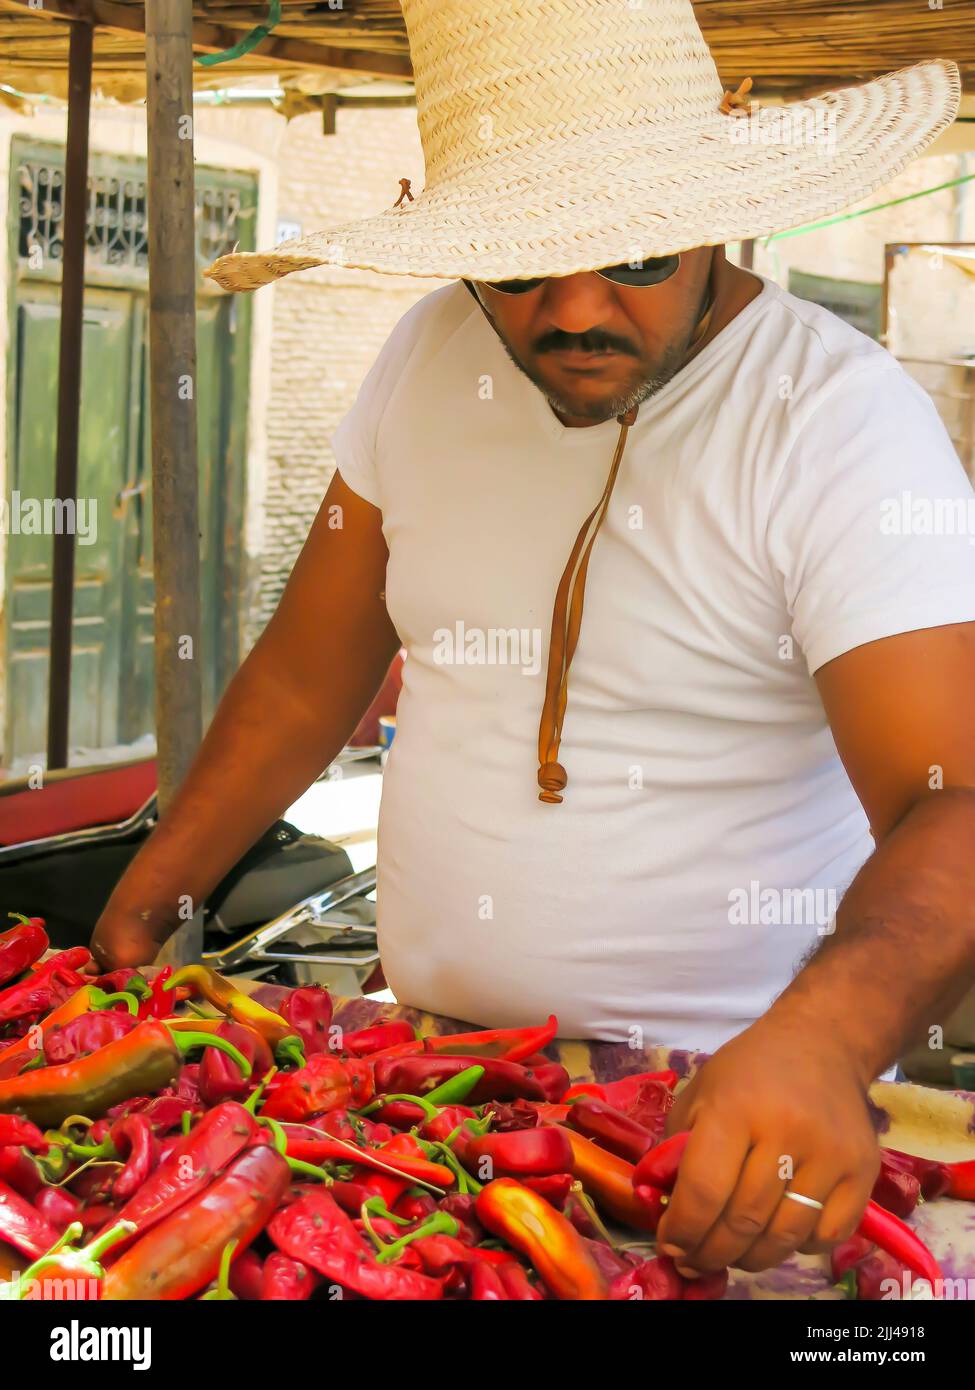 Market Vendor Selling Peppers Stock Photo